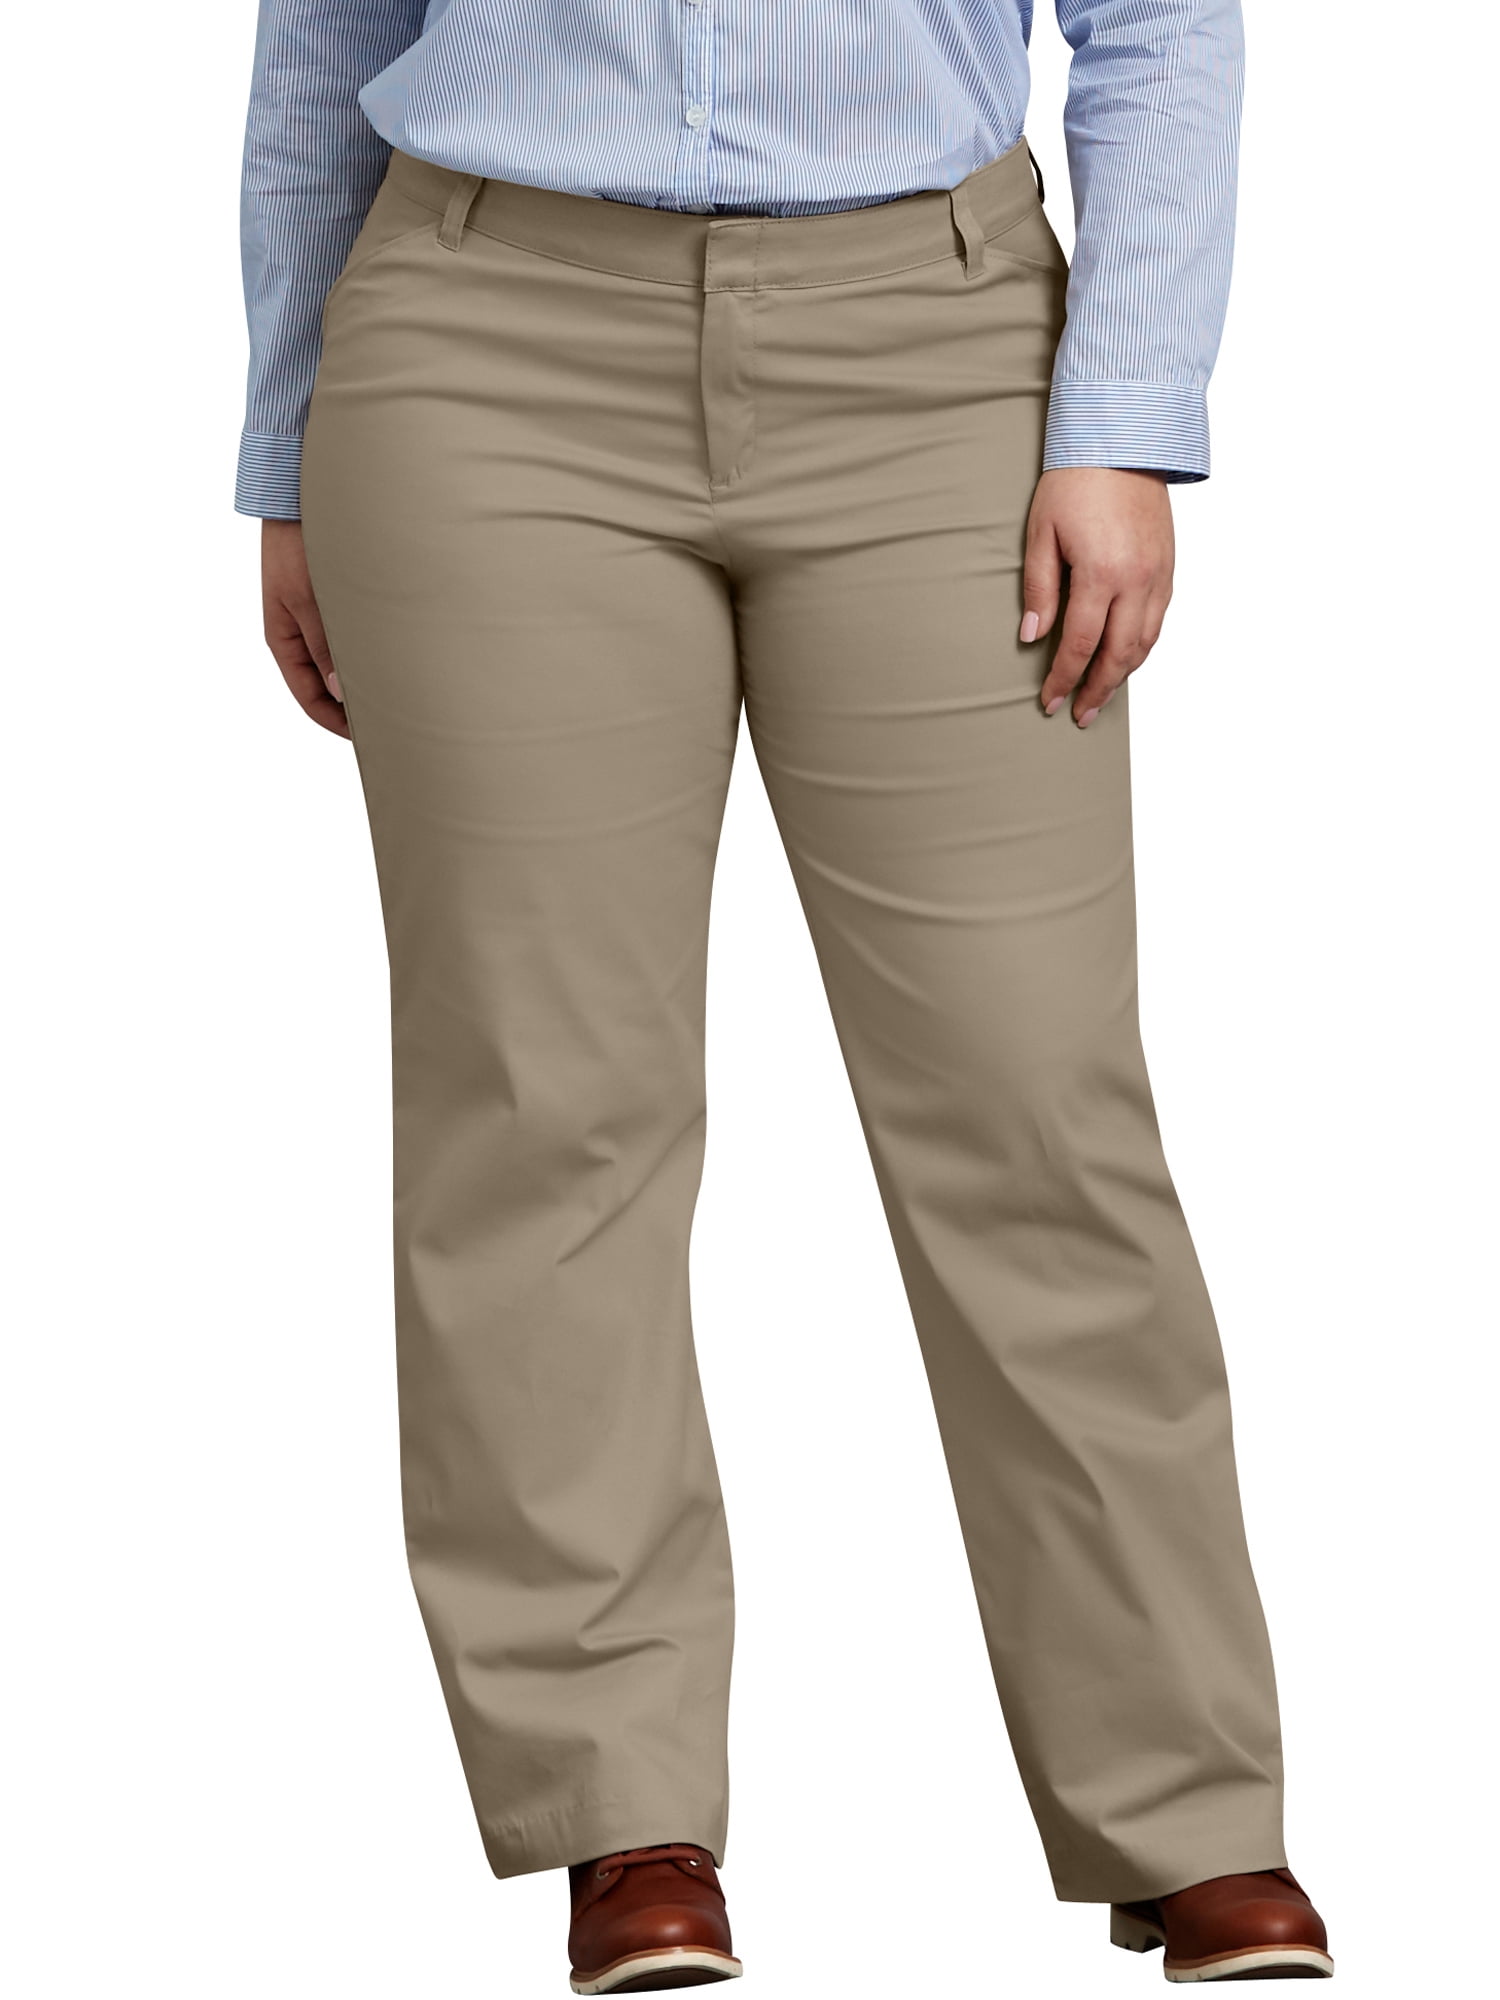 Dickies Women's Plus Size Relaxed Straight Stretch Twill Pant